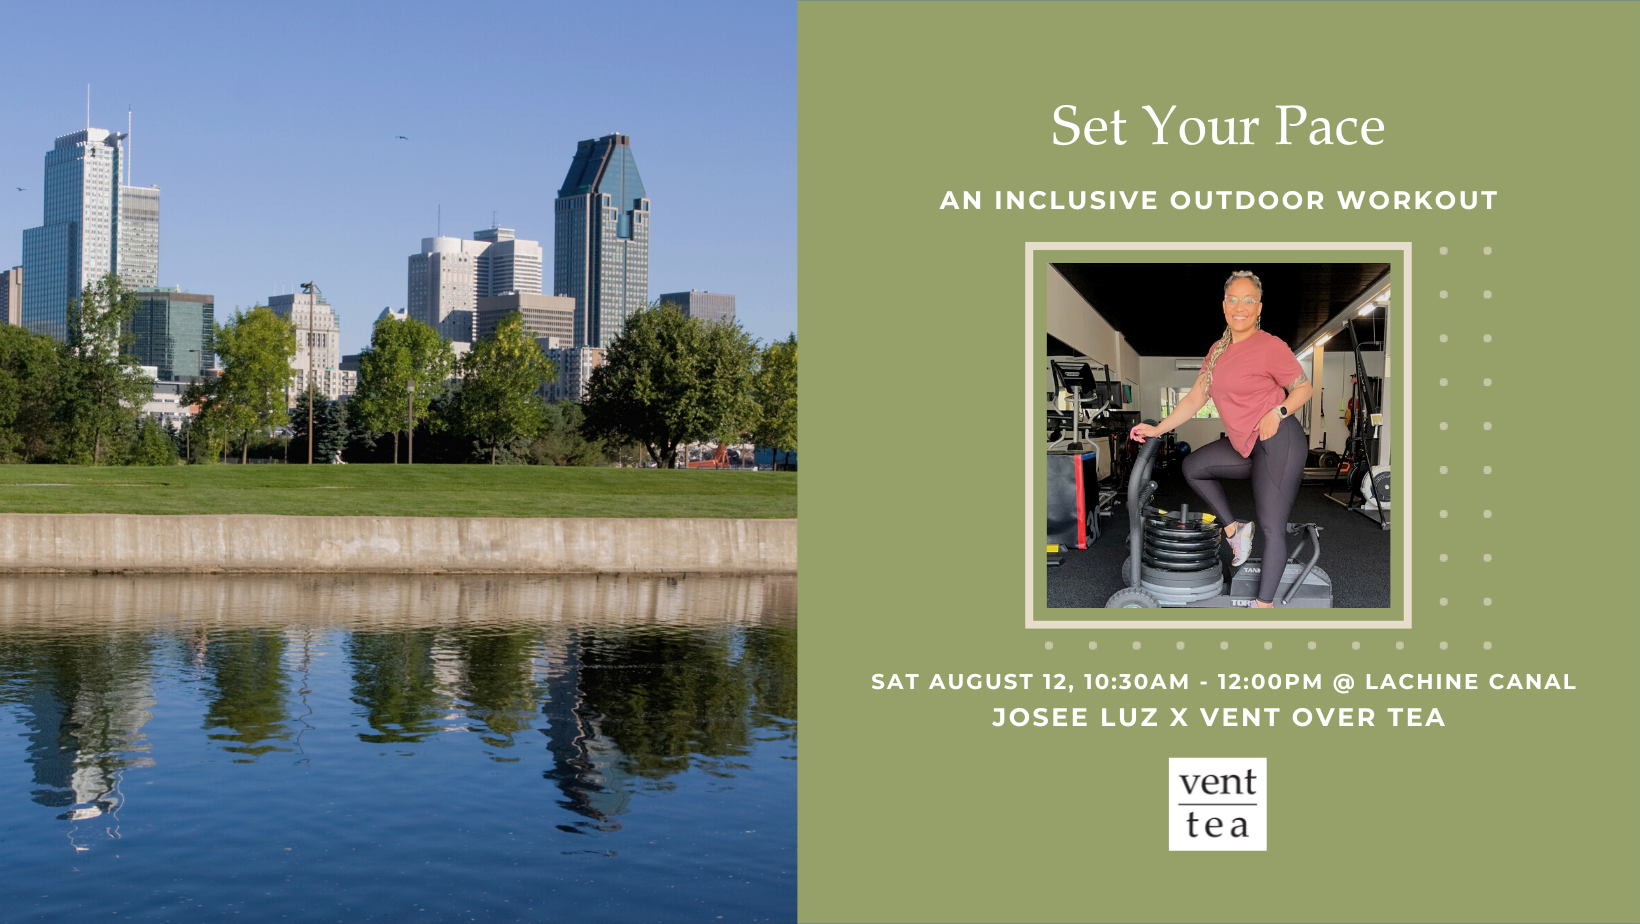 Set Your Pace: An Inclusive Outdoor Workout